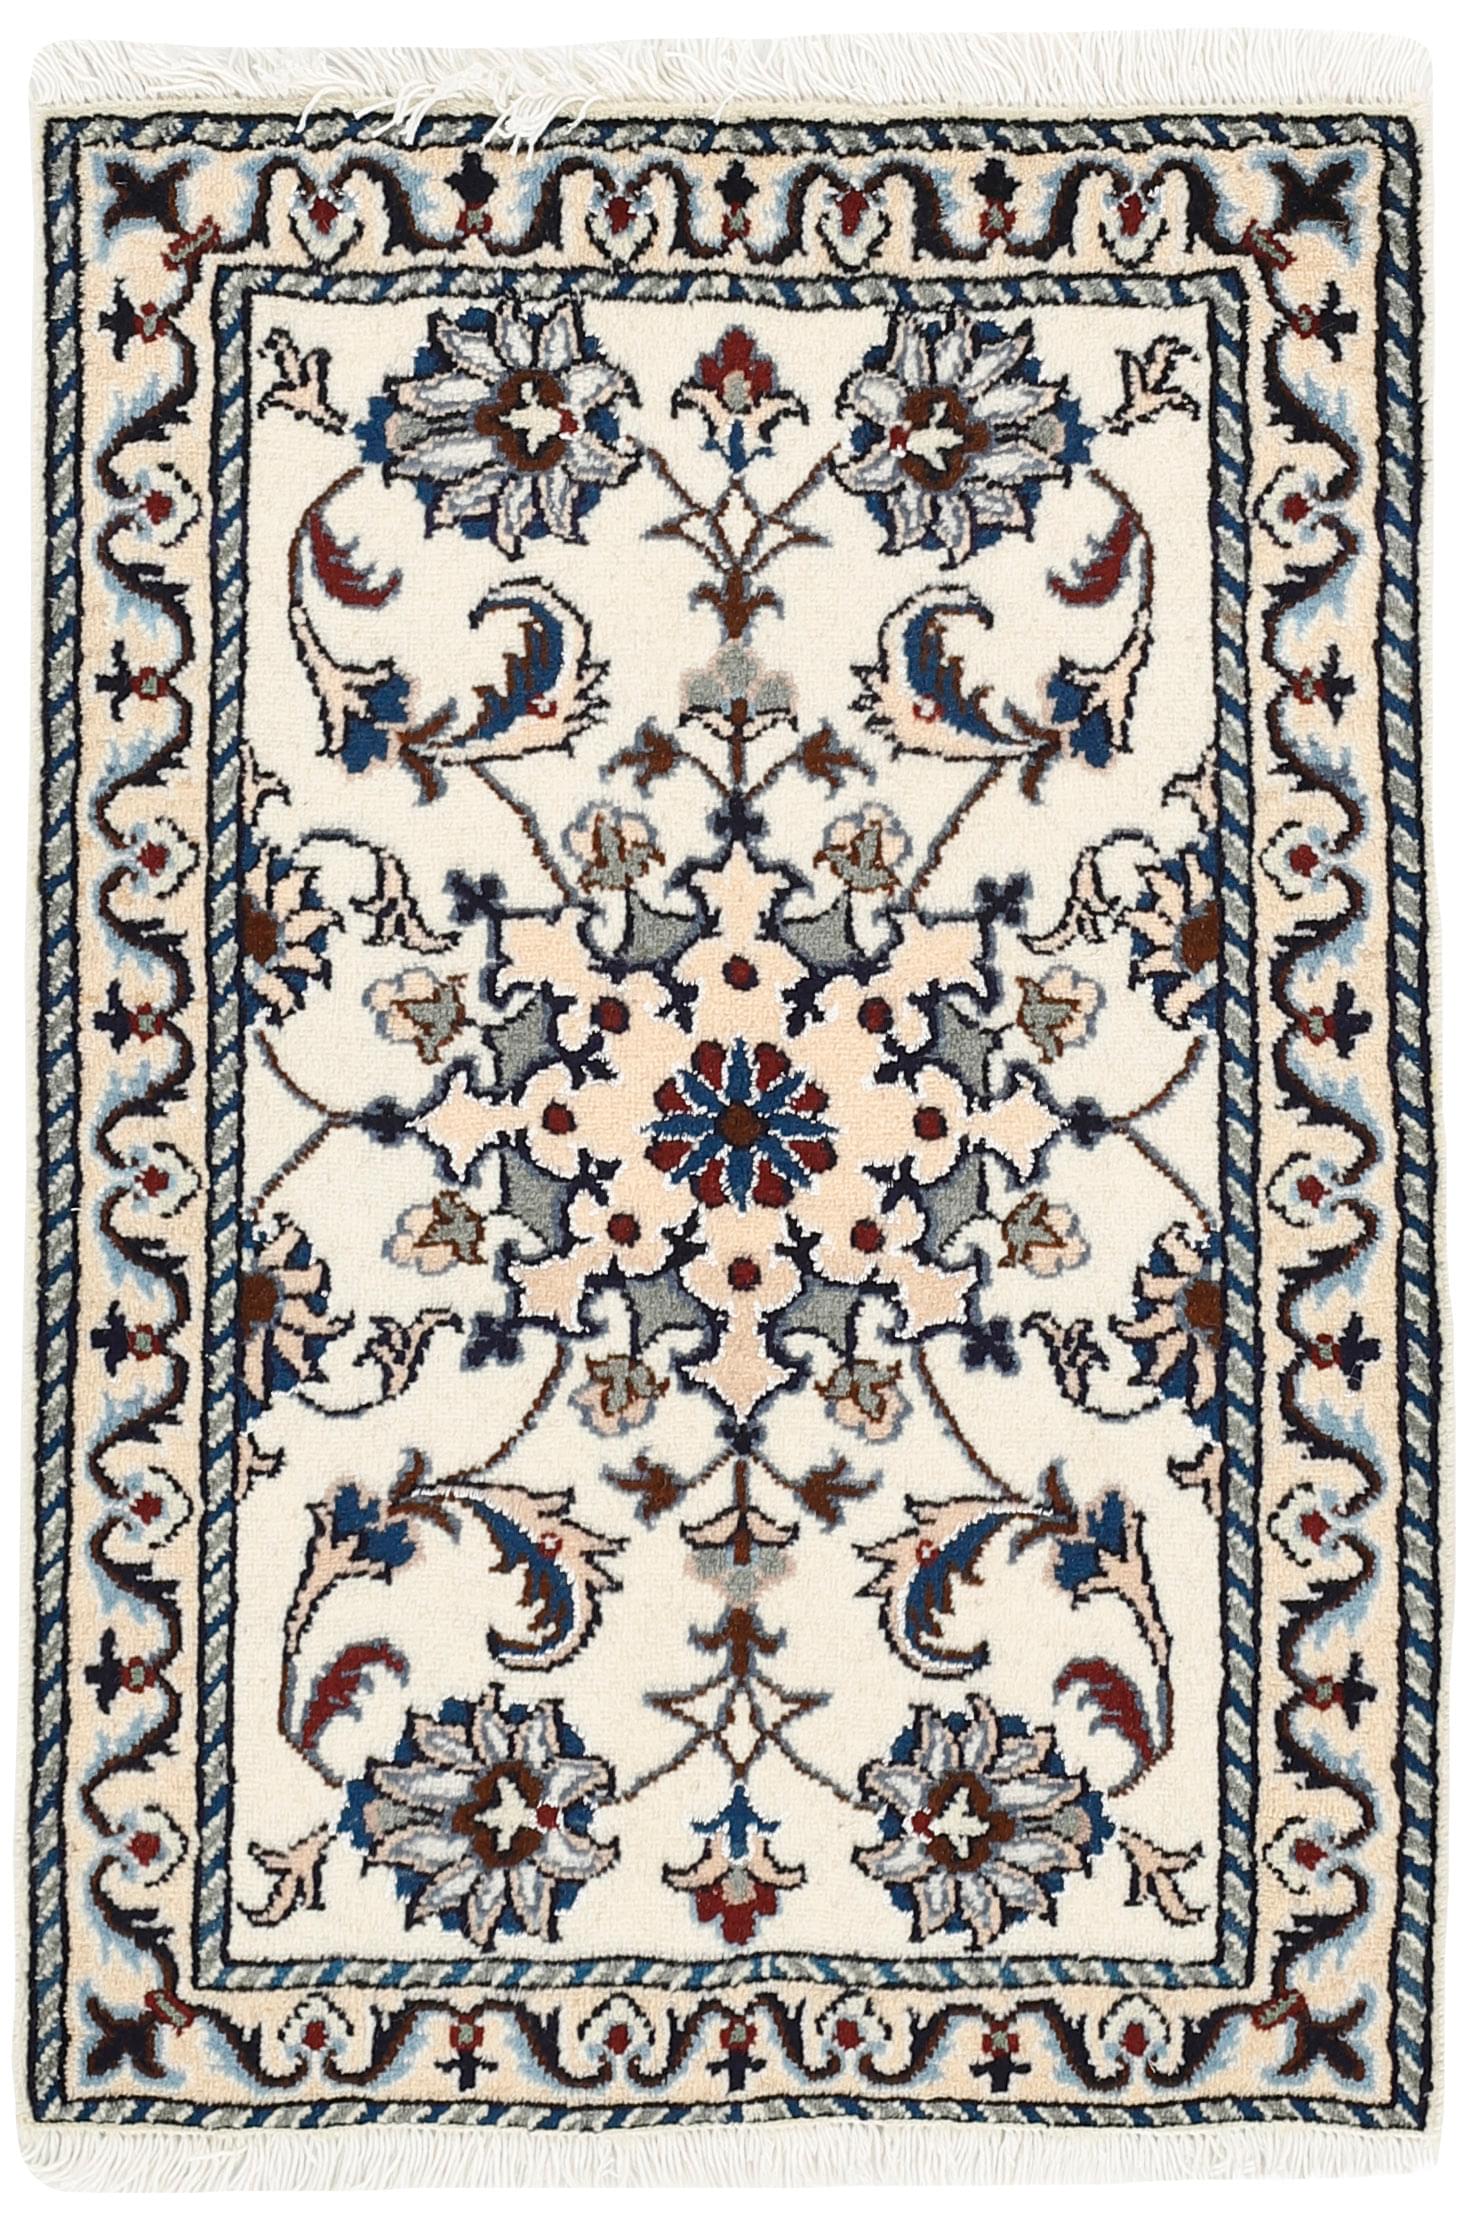 Authentic persian rug with a traditional floral design in cream and blue